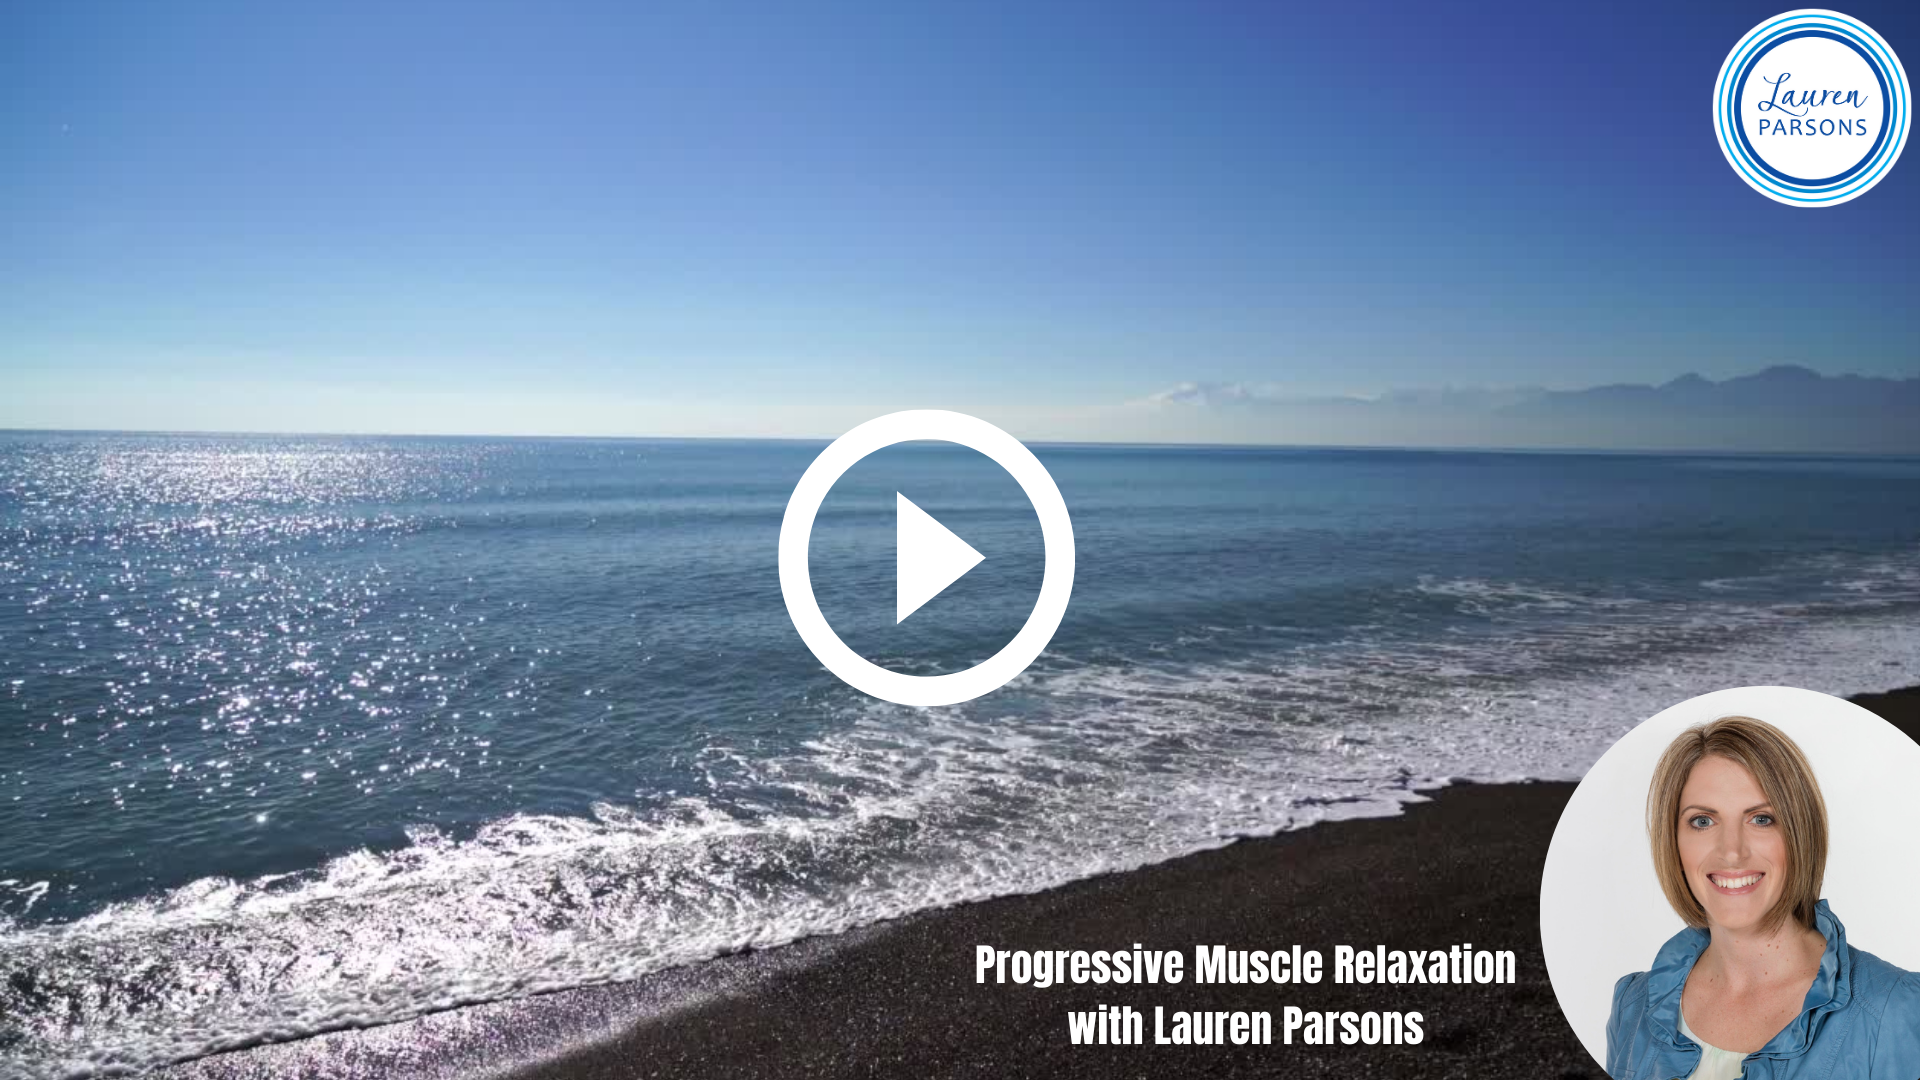 Progressive Muscle Relaxation Image of a Beach